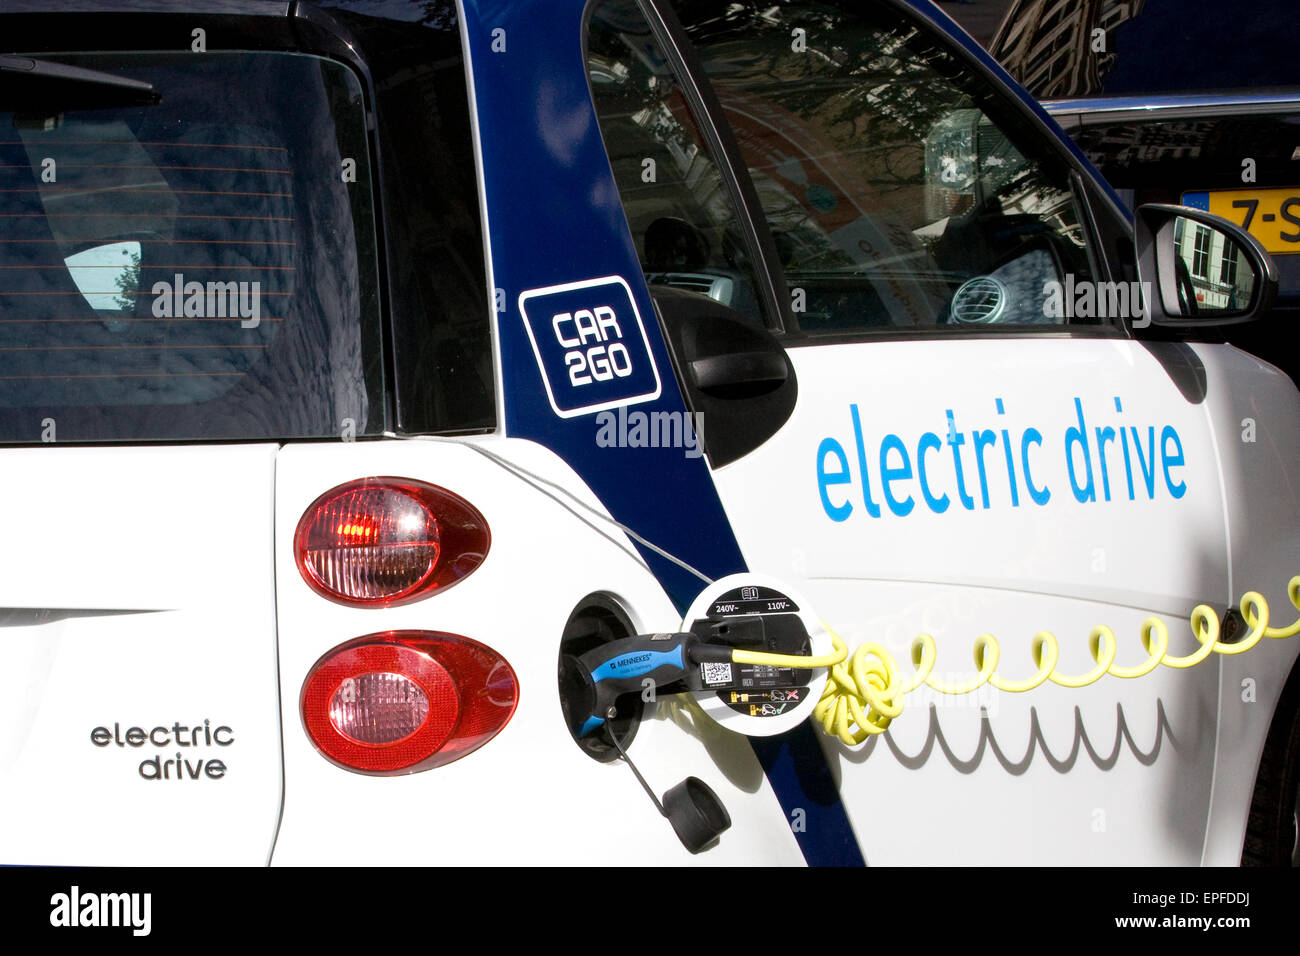 Electric car charging from an on street Electric charge station Stock Photo